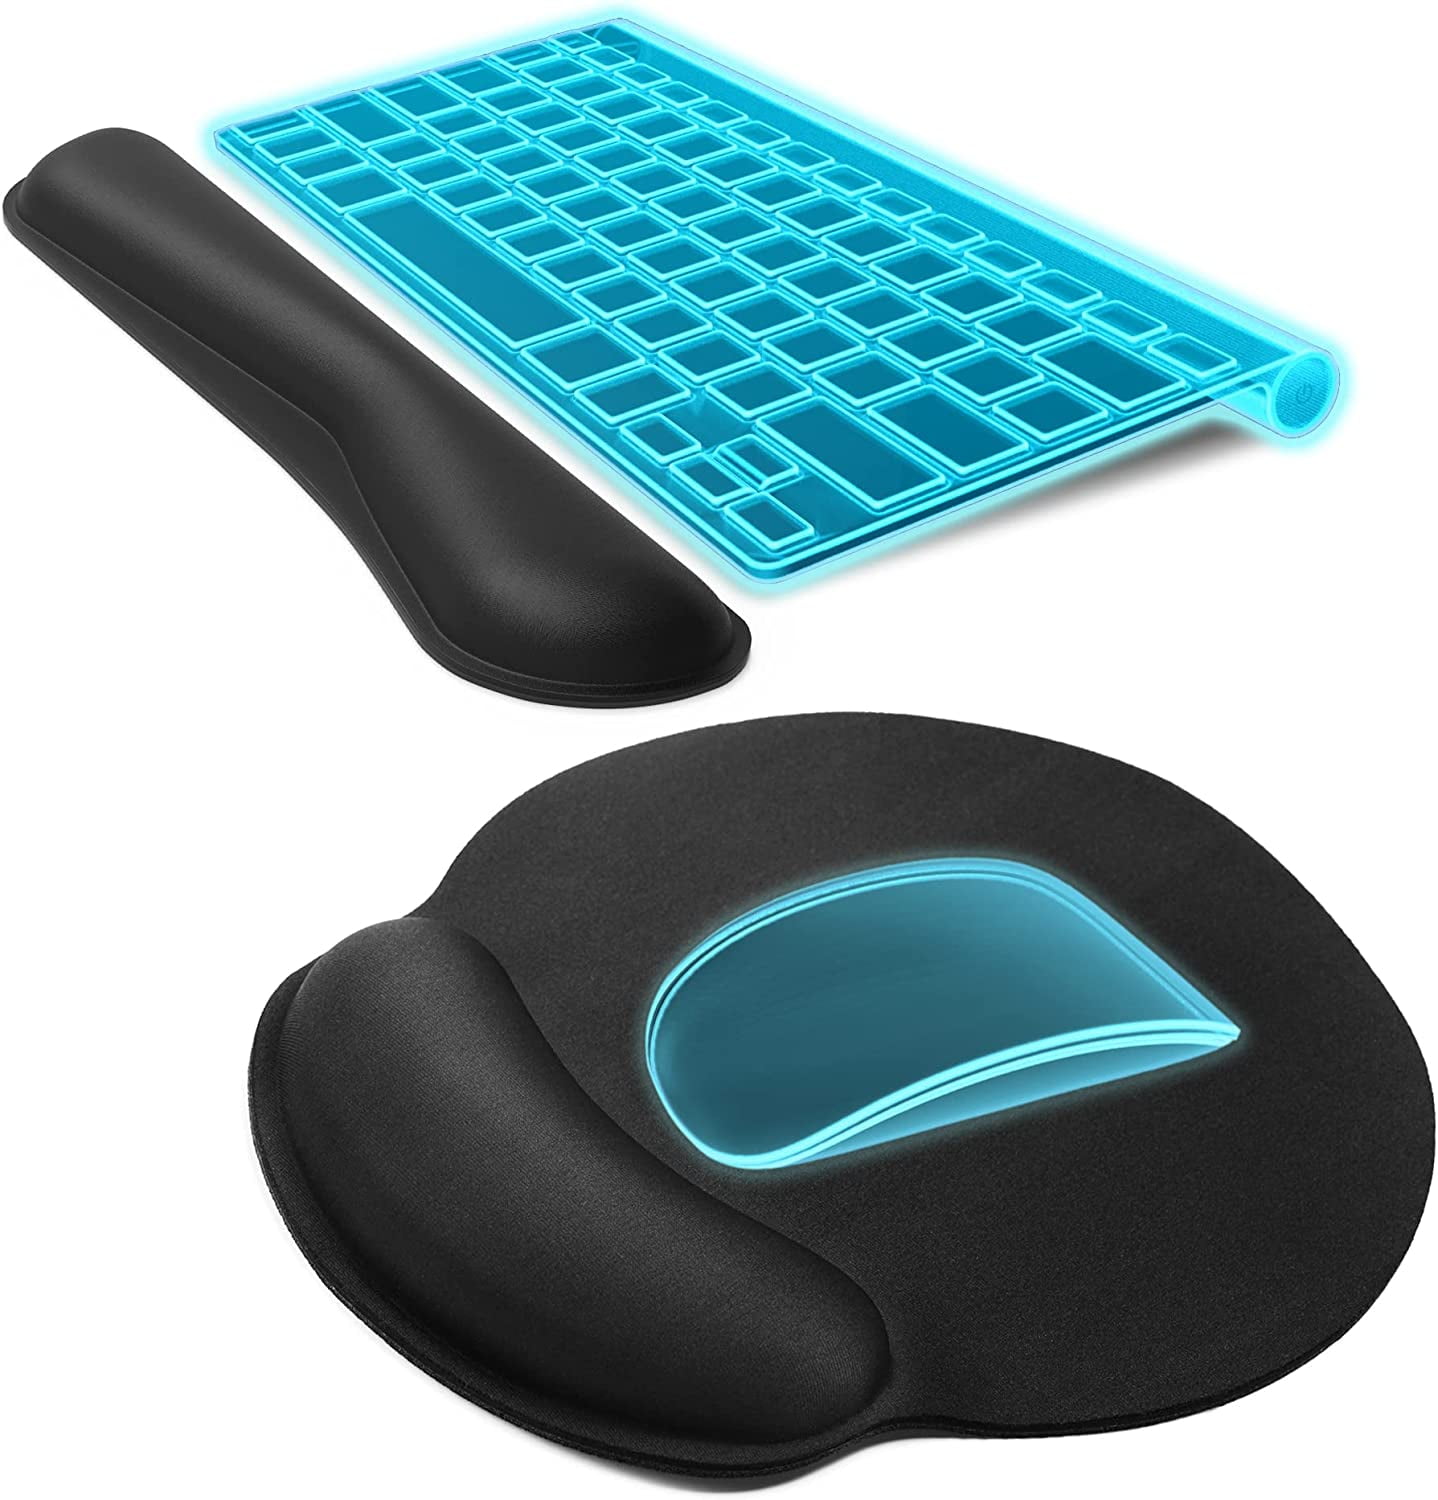  4-in-1 Large Gaming Mouse Pad, Keyboard Wrist Rest Pad & Wrist  Support Mousepad Set, Extended Desk Pad Waterproof Desk Mat for Home Office  Study Game - Blue : Office Products